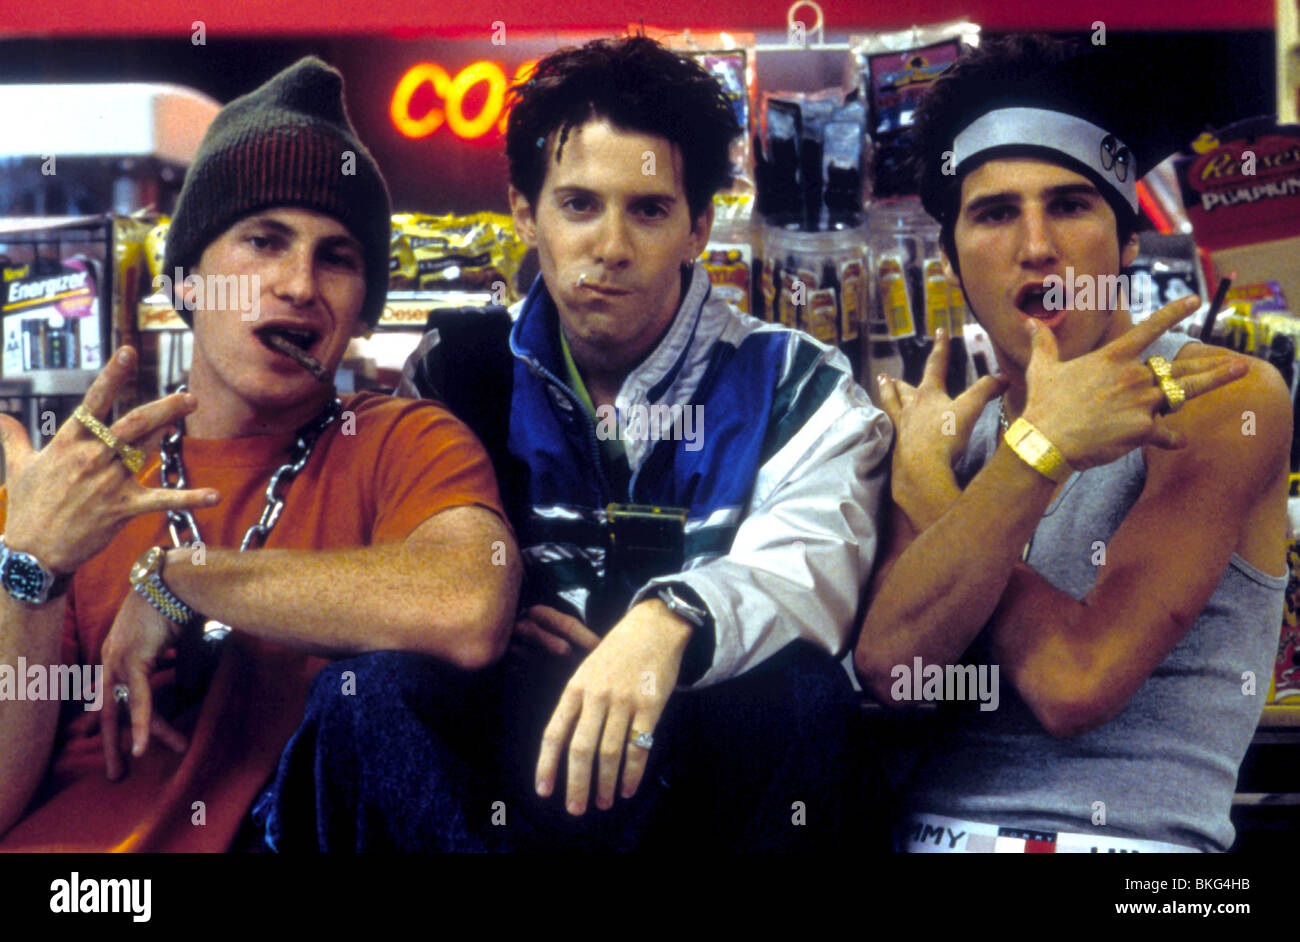 CAN'T HARDLY WAIT (1998) BRANDON WILLIAMS, SETH GREEN, BOBBY JACOBY CHW 013 Stock Photo